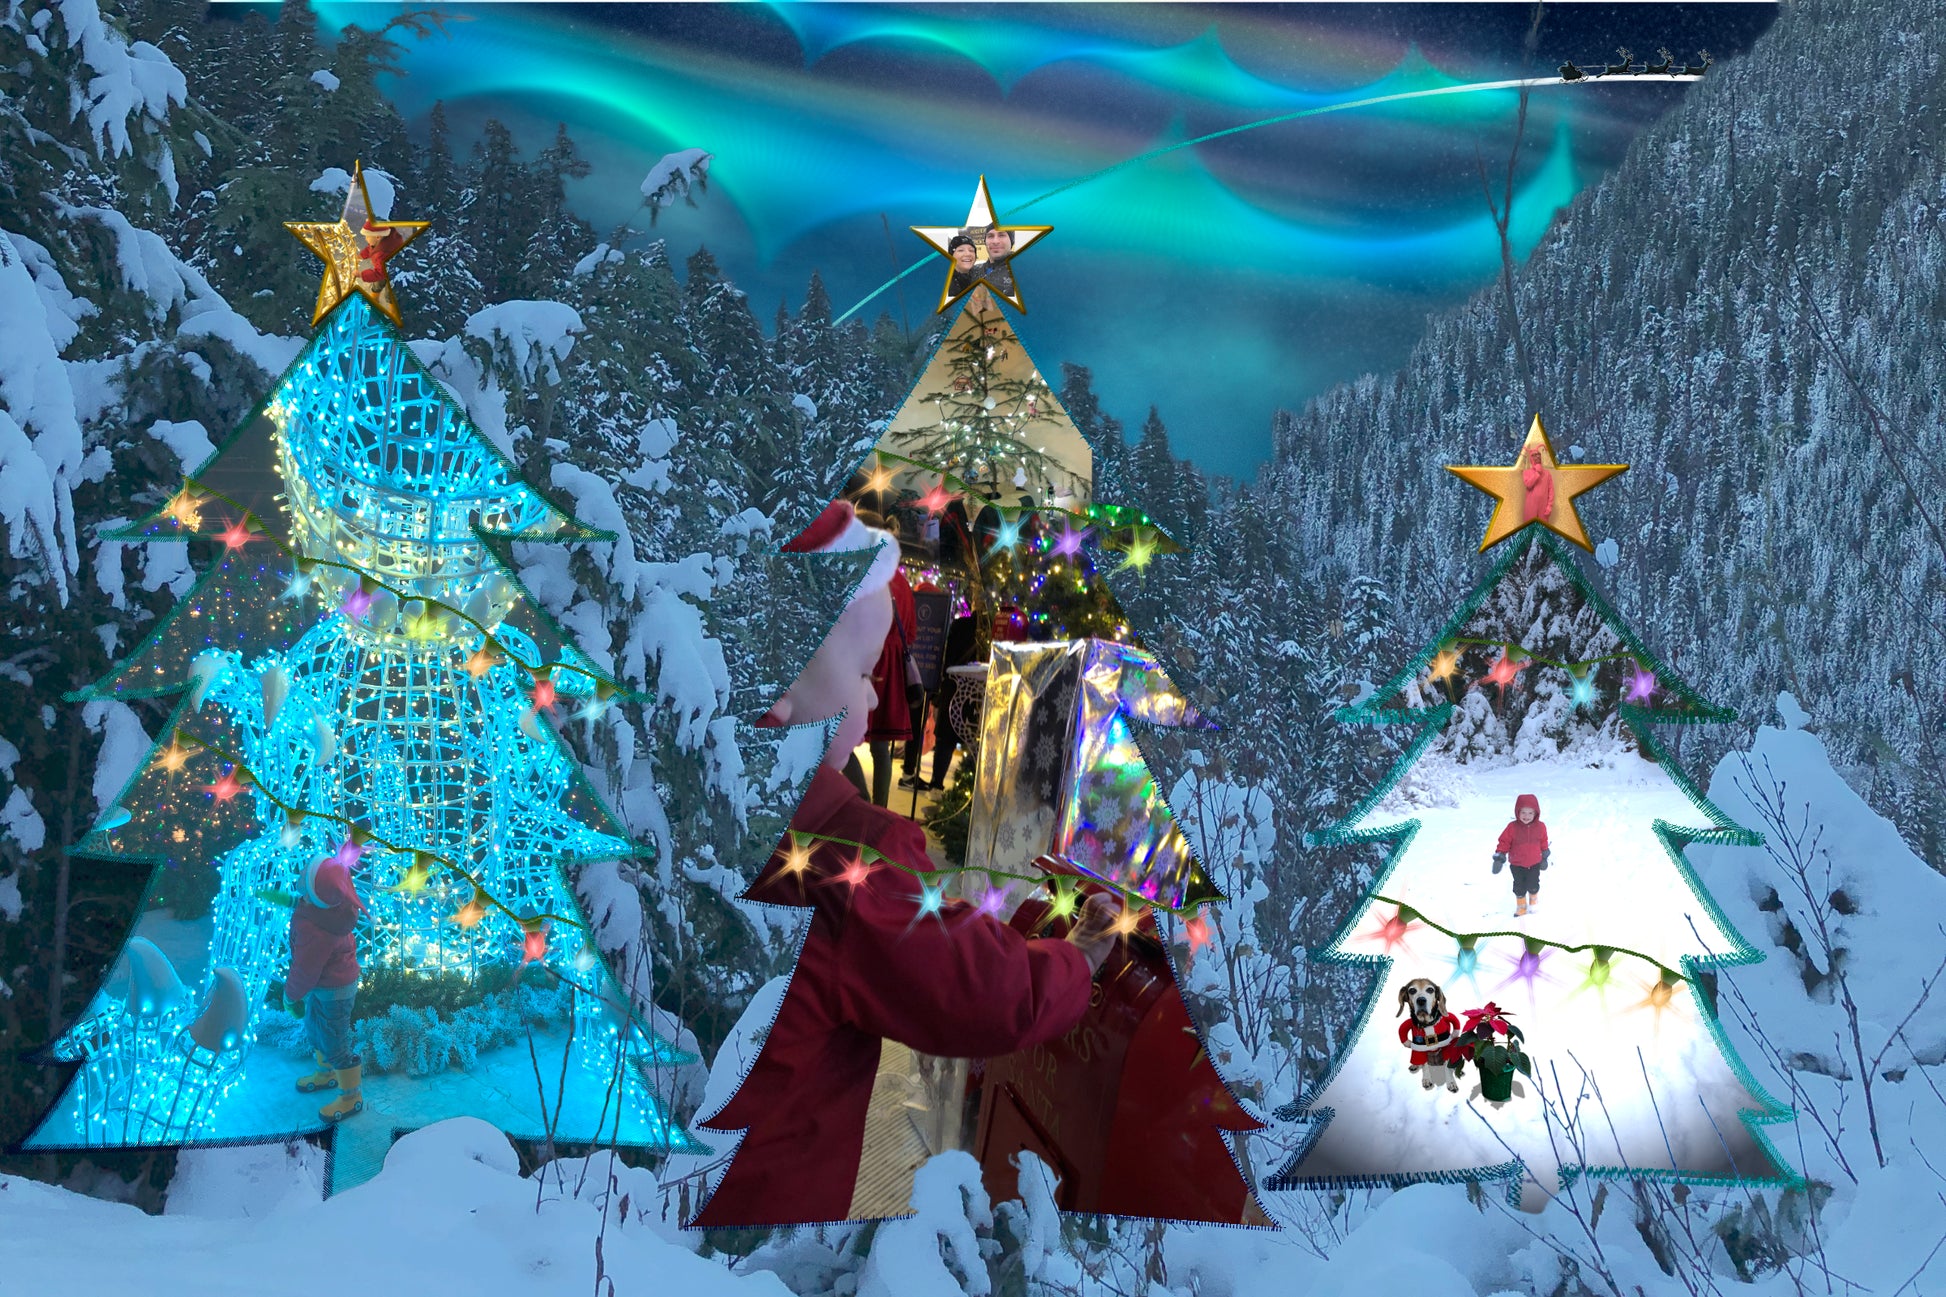 Photo collage with Santa sleigh, norther lights, Christmas trees, holiday lights, beagle in elf costume, cutting tree, lights in Seattle